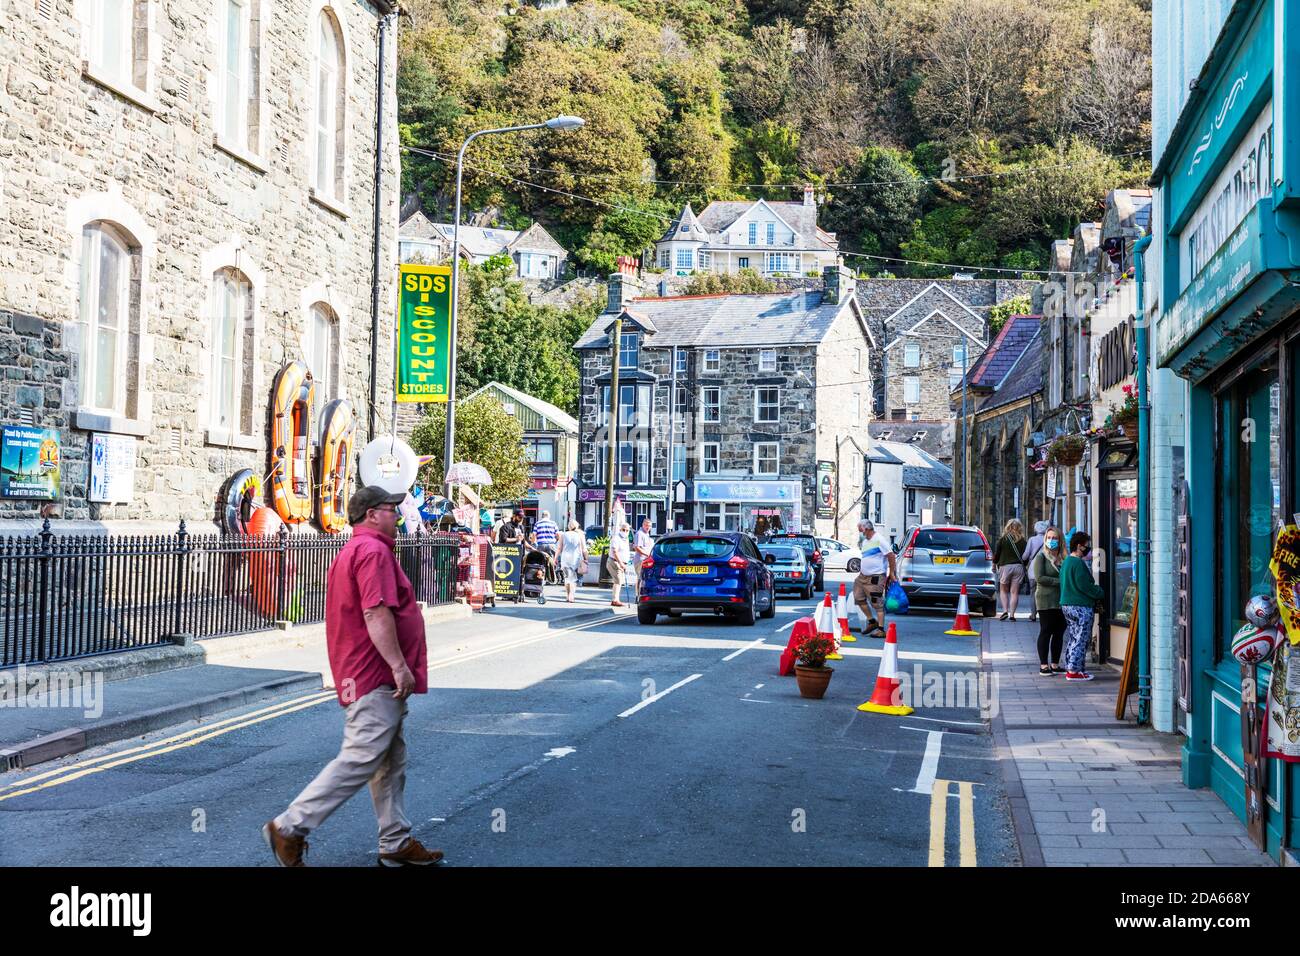 Barmouth is a seaside town and community in the county of Gwynedd, north-western Wales, Barmouth, Wales, UK, Barmouth town, Barmouth Wales, barmouth Stock Photo